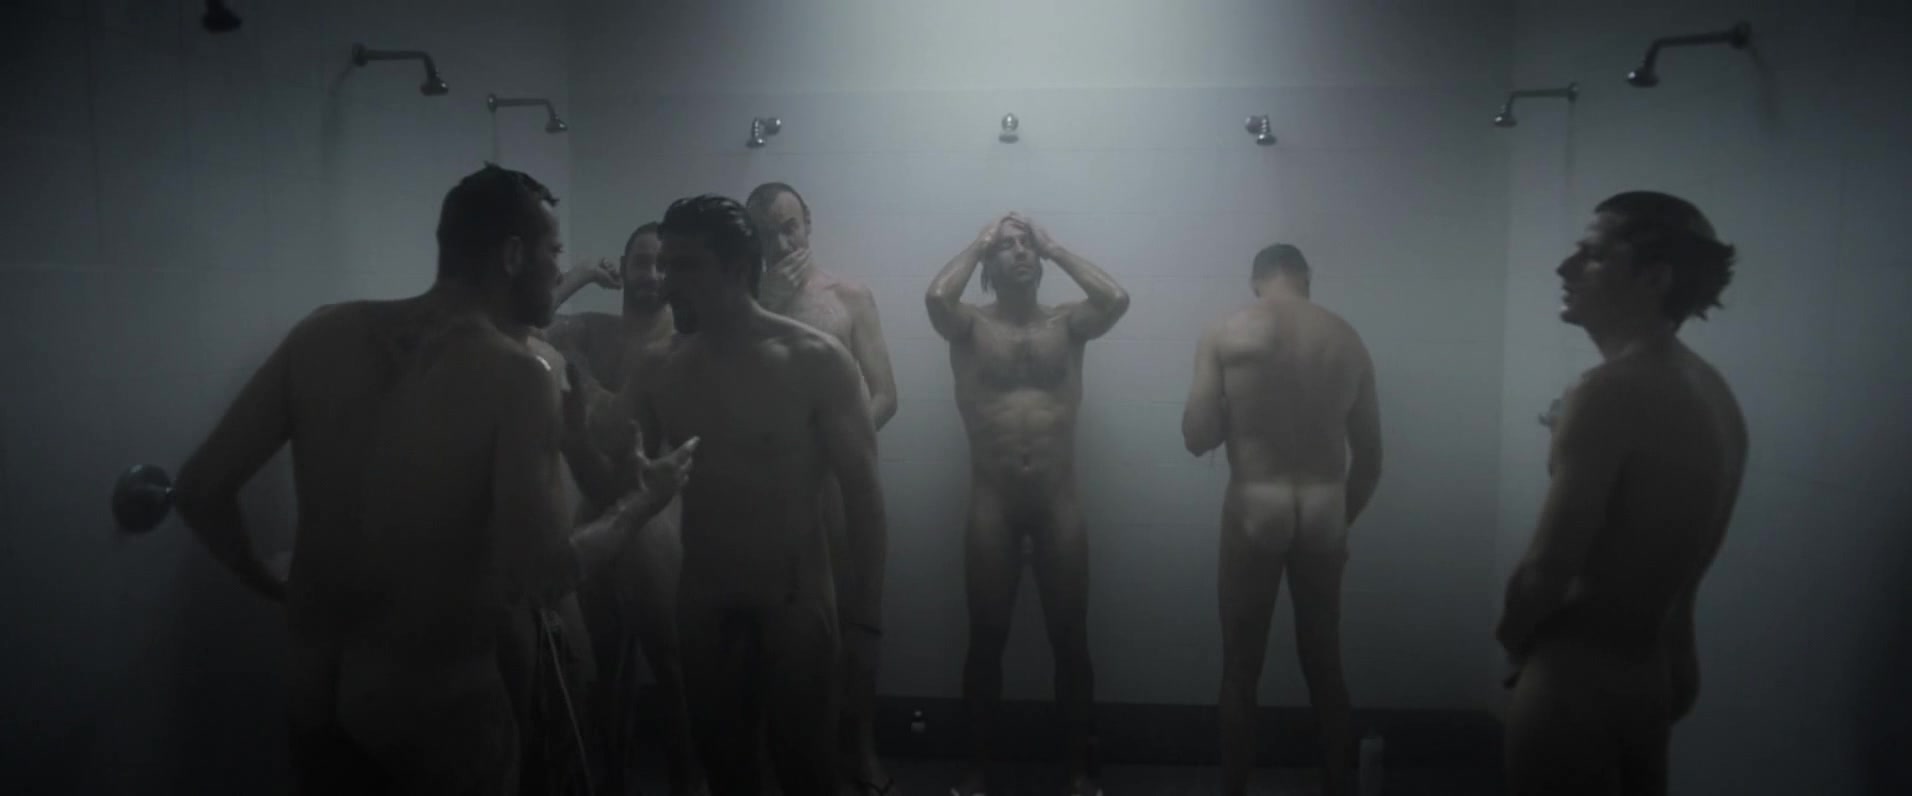 GREAT BUNCH OF GUYS IN THE SHOWER